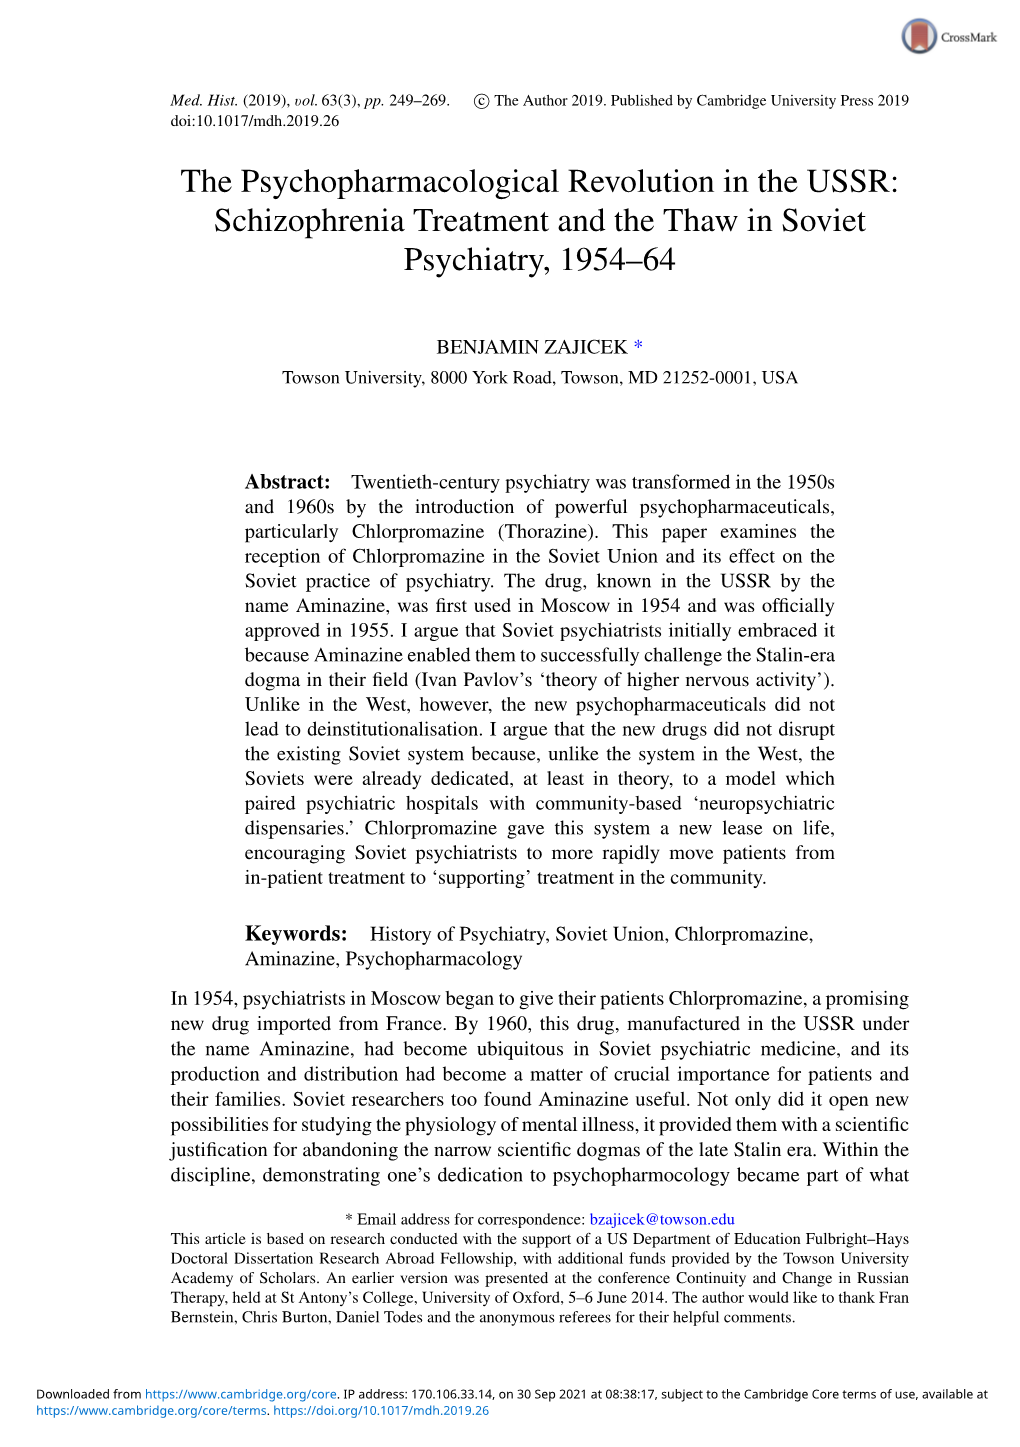 The Psychopharmacological Revolution in the USSR: Schizophrenia Treatment and the Thaw in Soviet Psychiatry, 1954–64